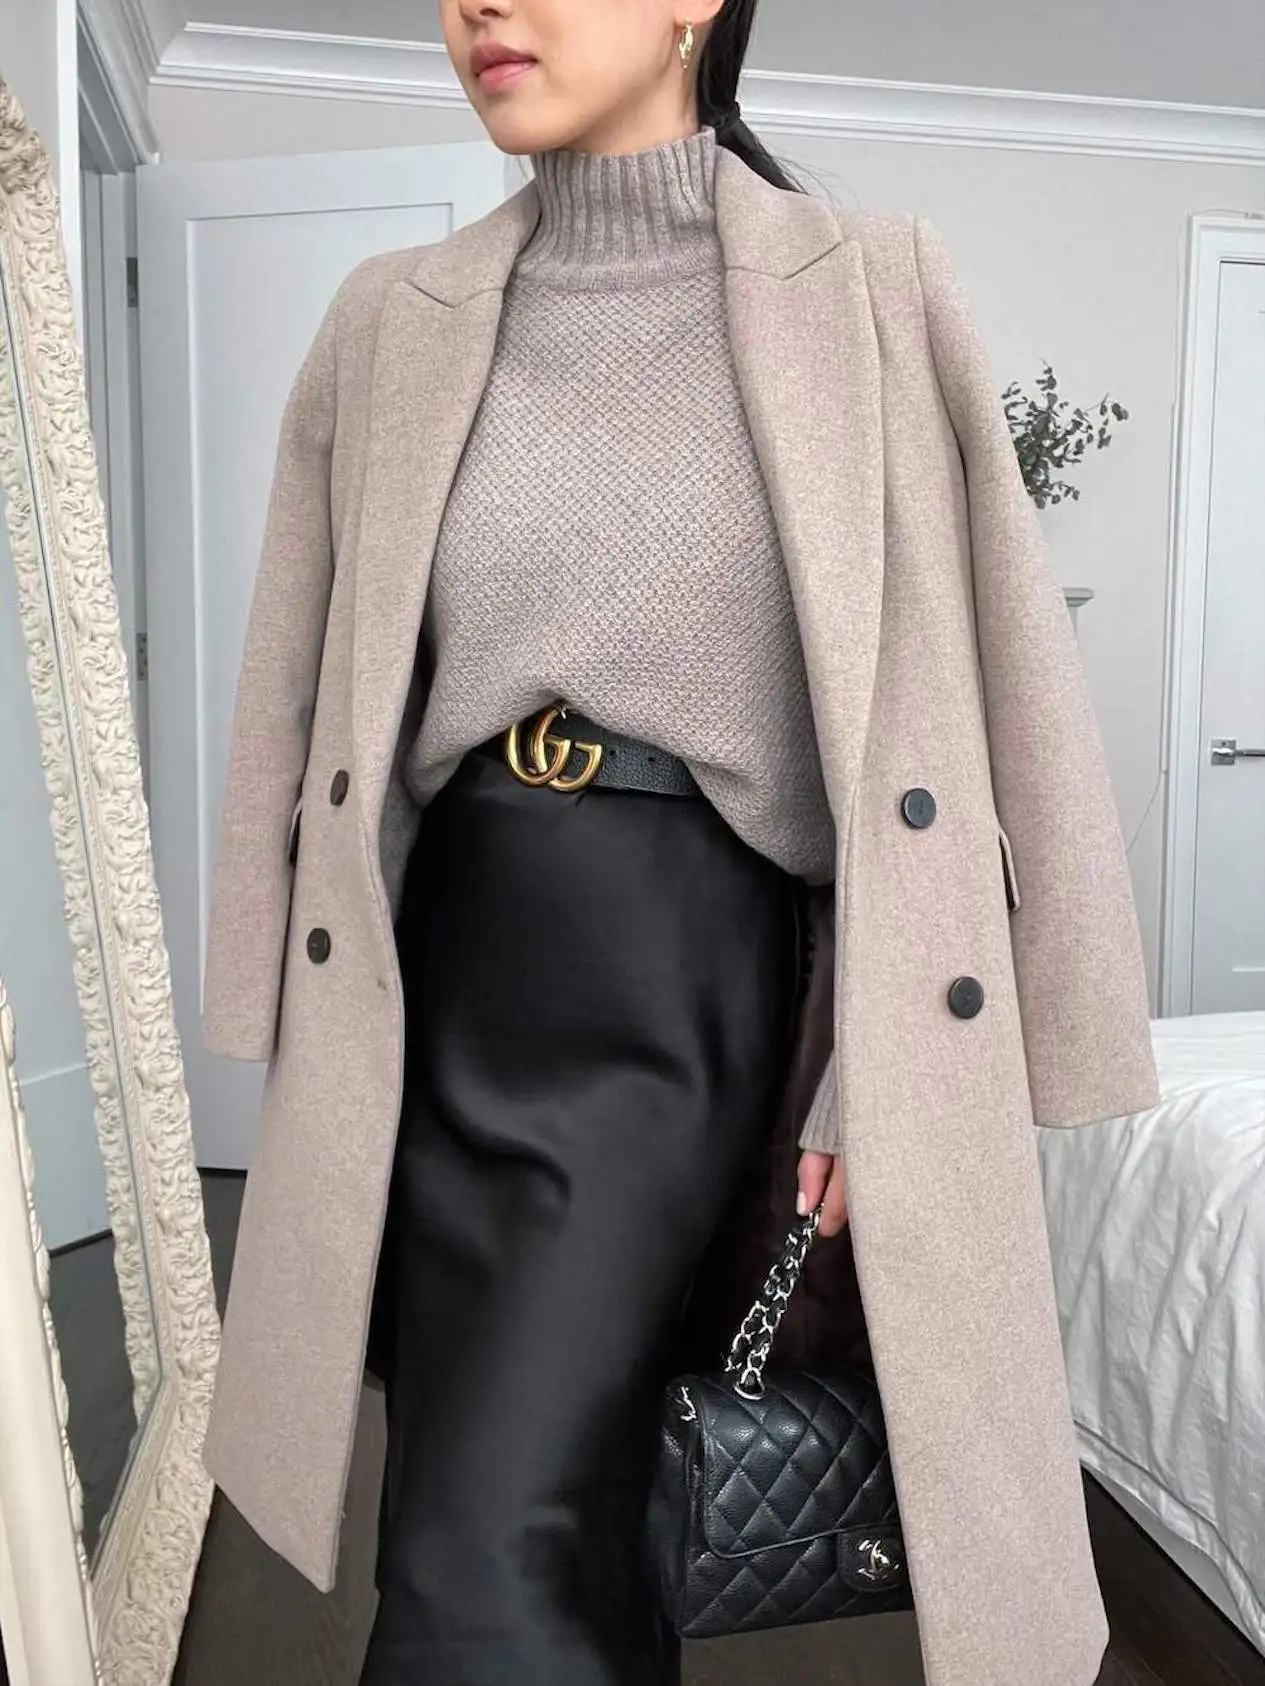 How to Style Sweater Over Dress Like a Pro